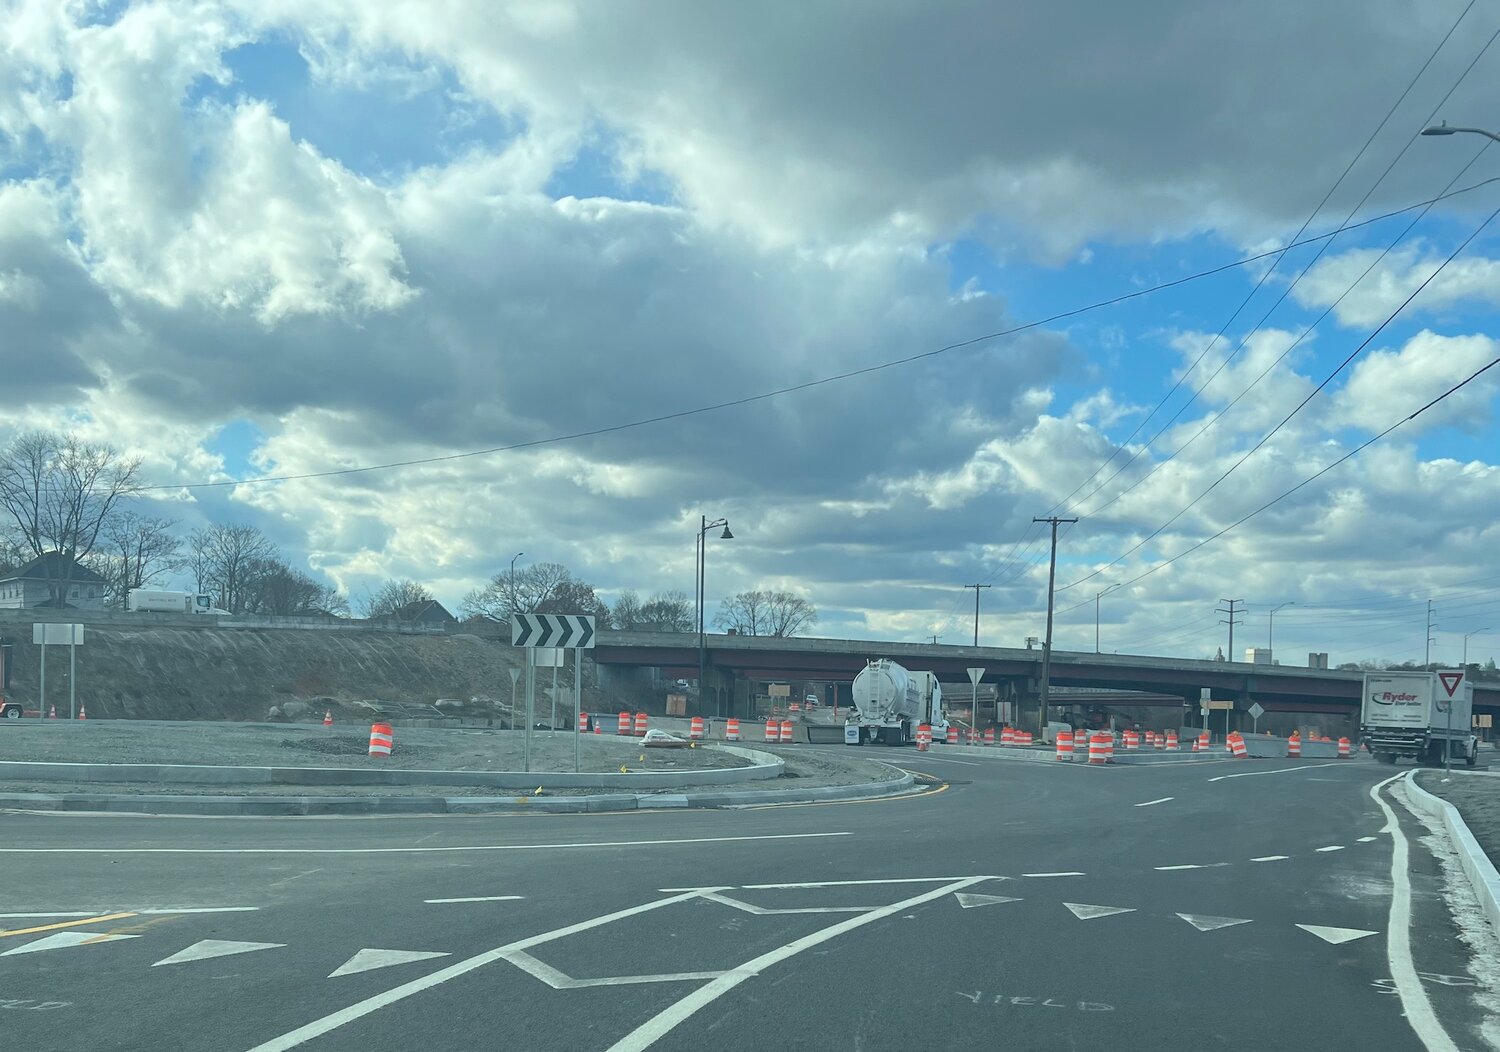 A view of the roundabout at the new Henderson Bridge from the Massasoit Avenue side.